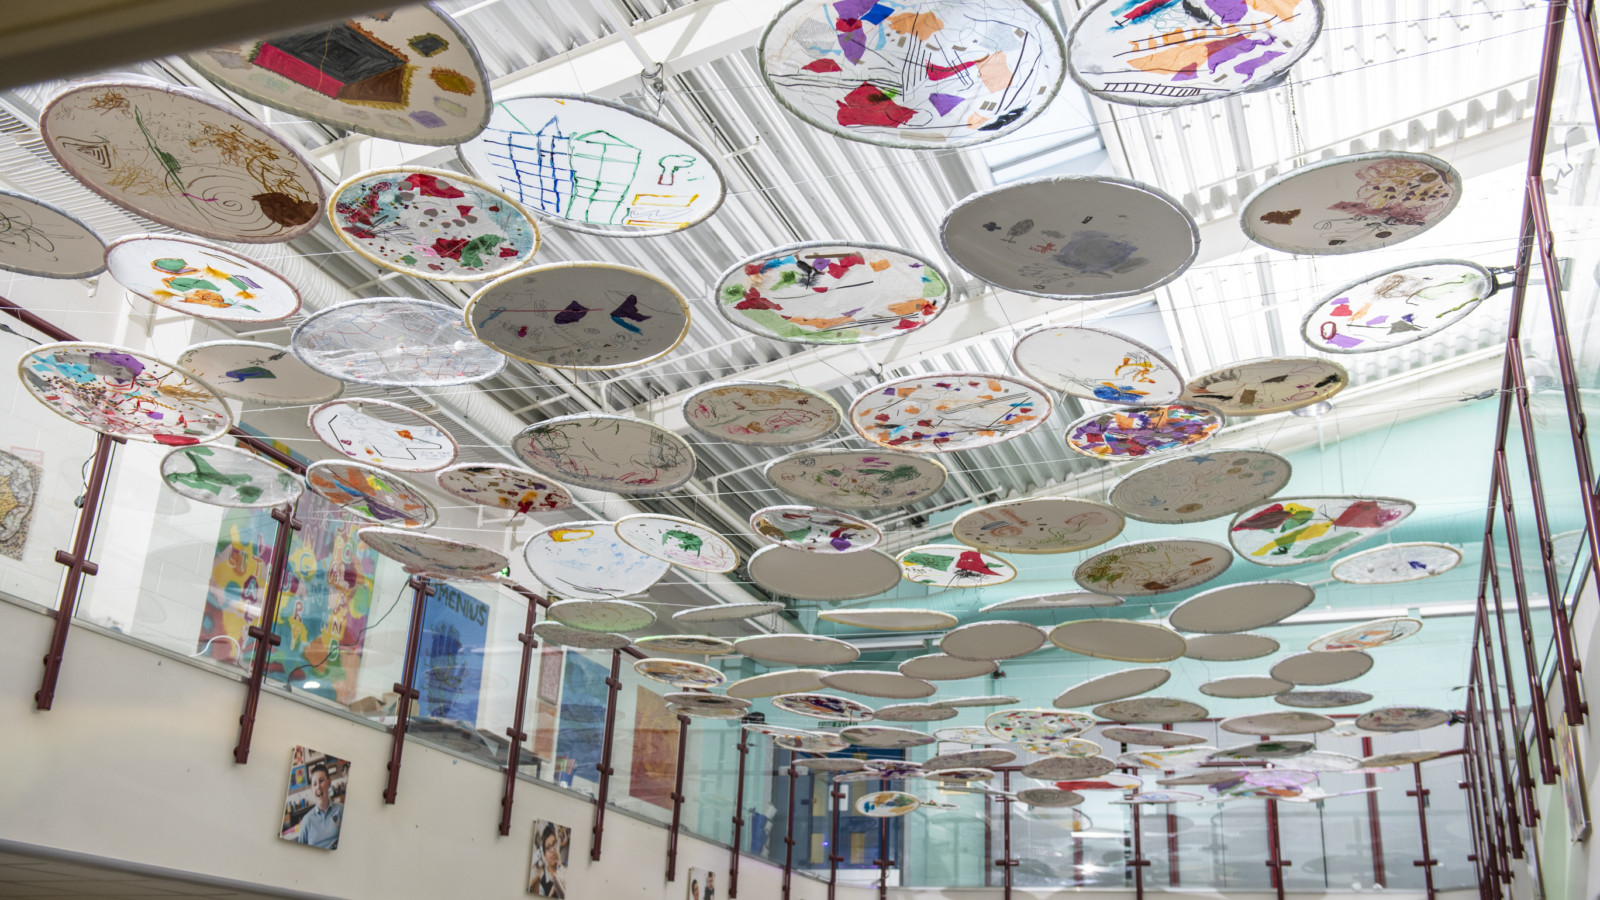 In a large bright room a collection of circles are suspended from one balcony to another, above a seating area. The circles are decorated with patterns in many different colours and shapes.